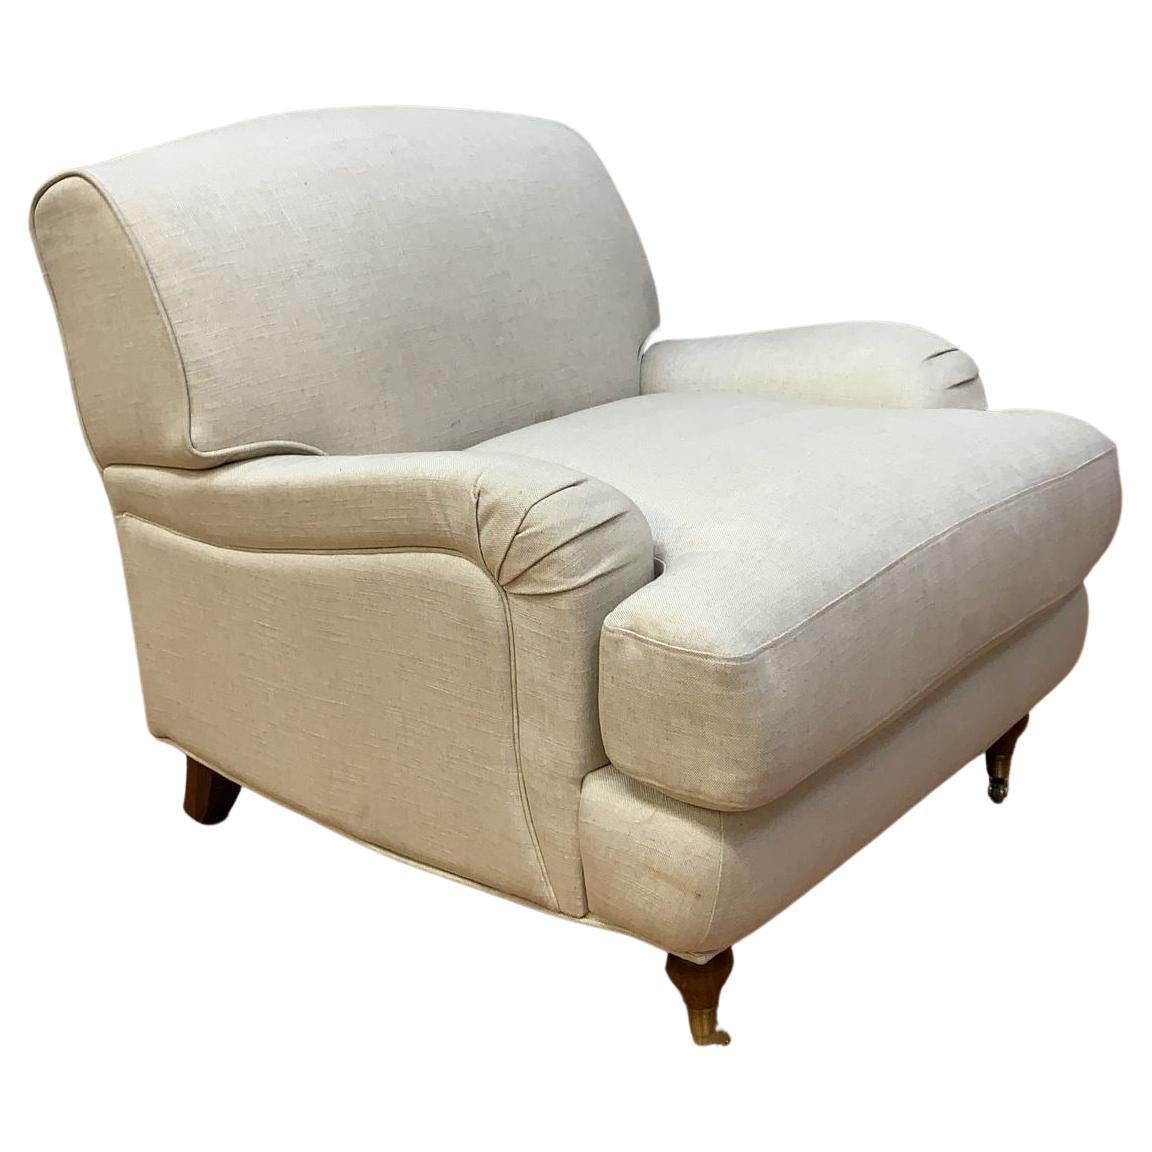 Vintage Rolled Arm Sydney Club Chair Upholstered in Cream Linen For Sale